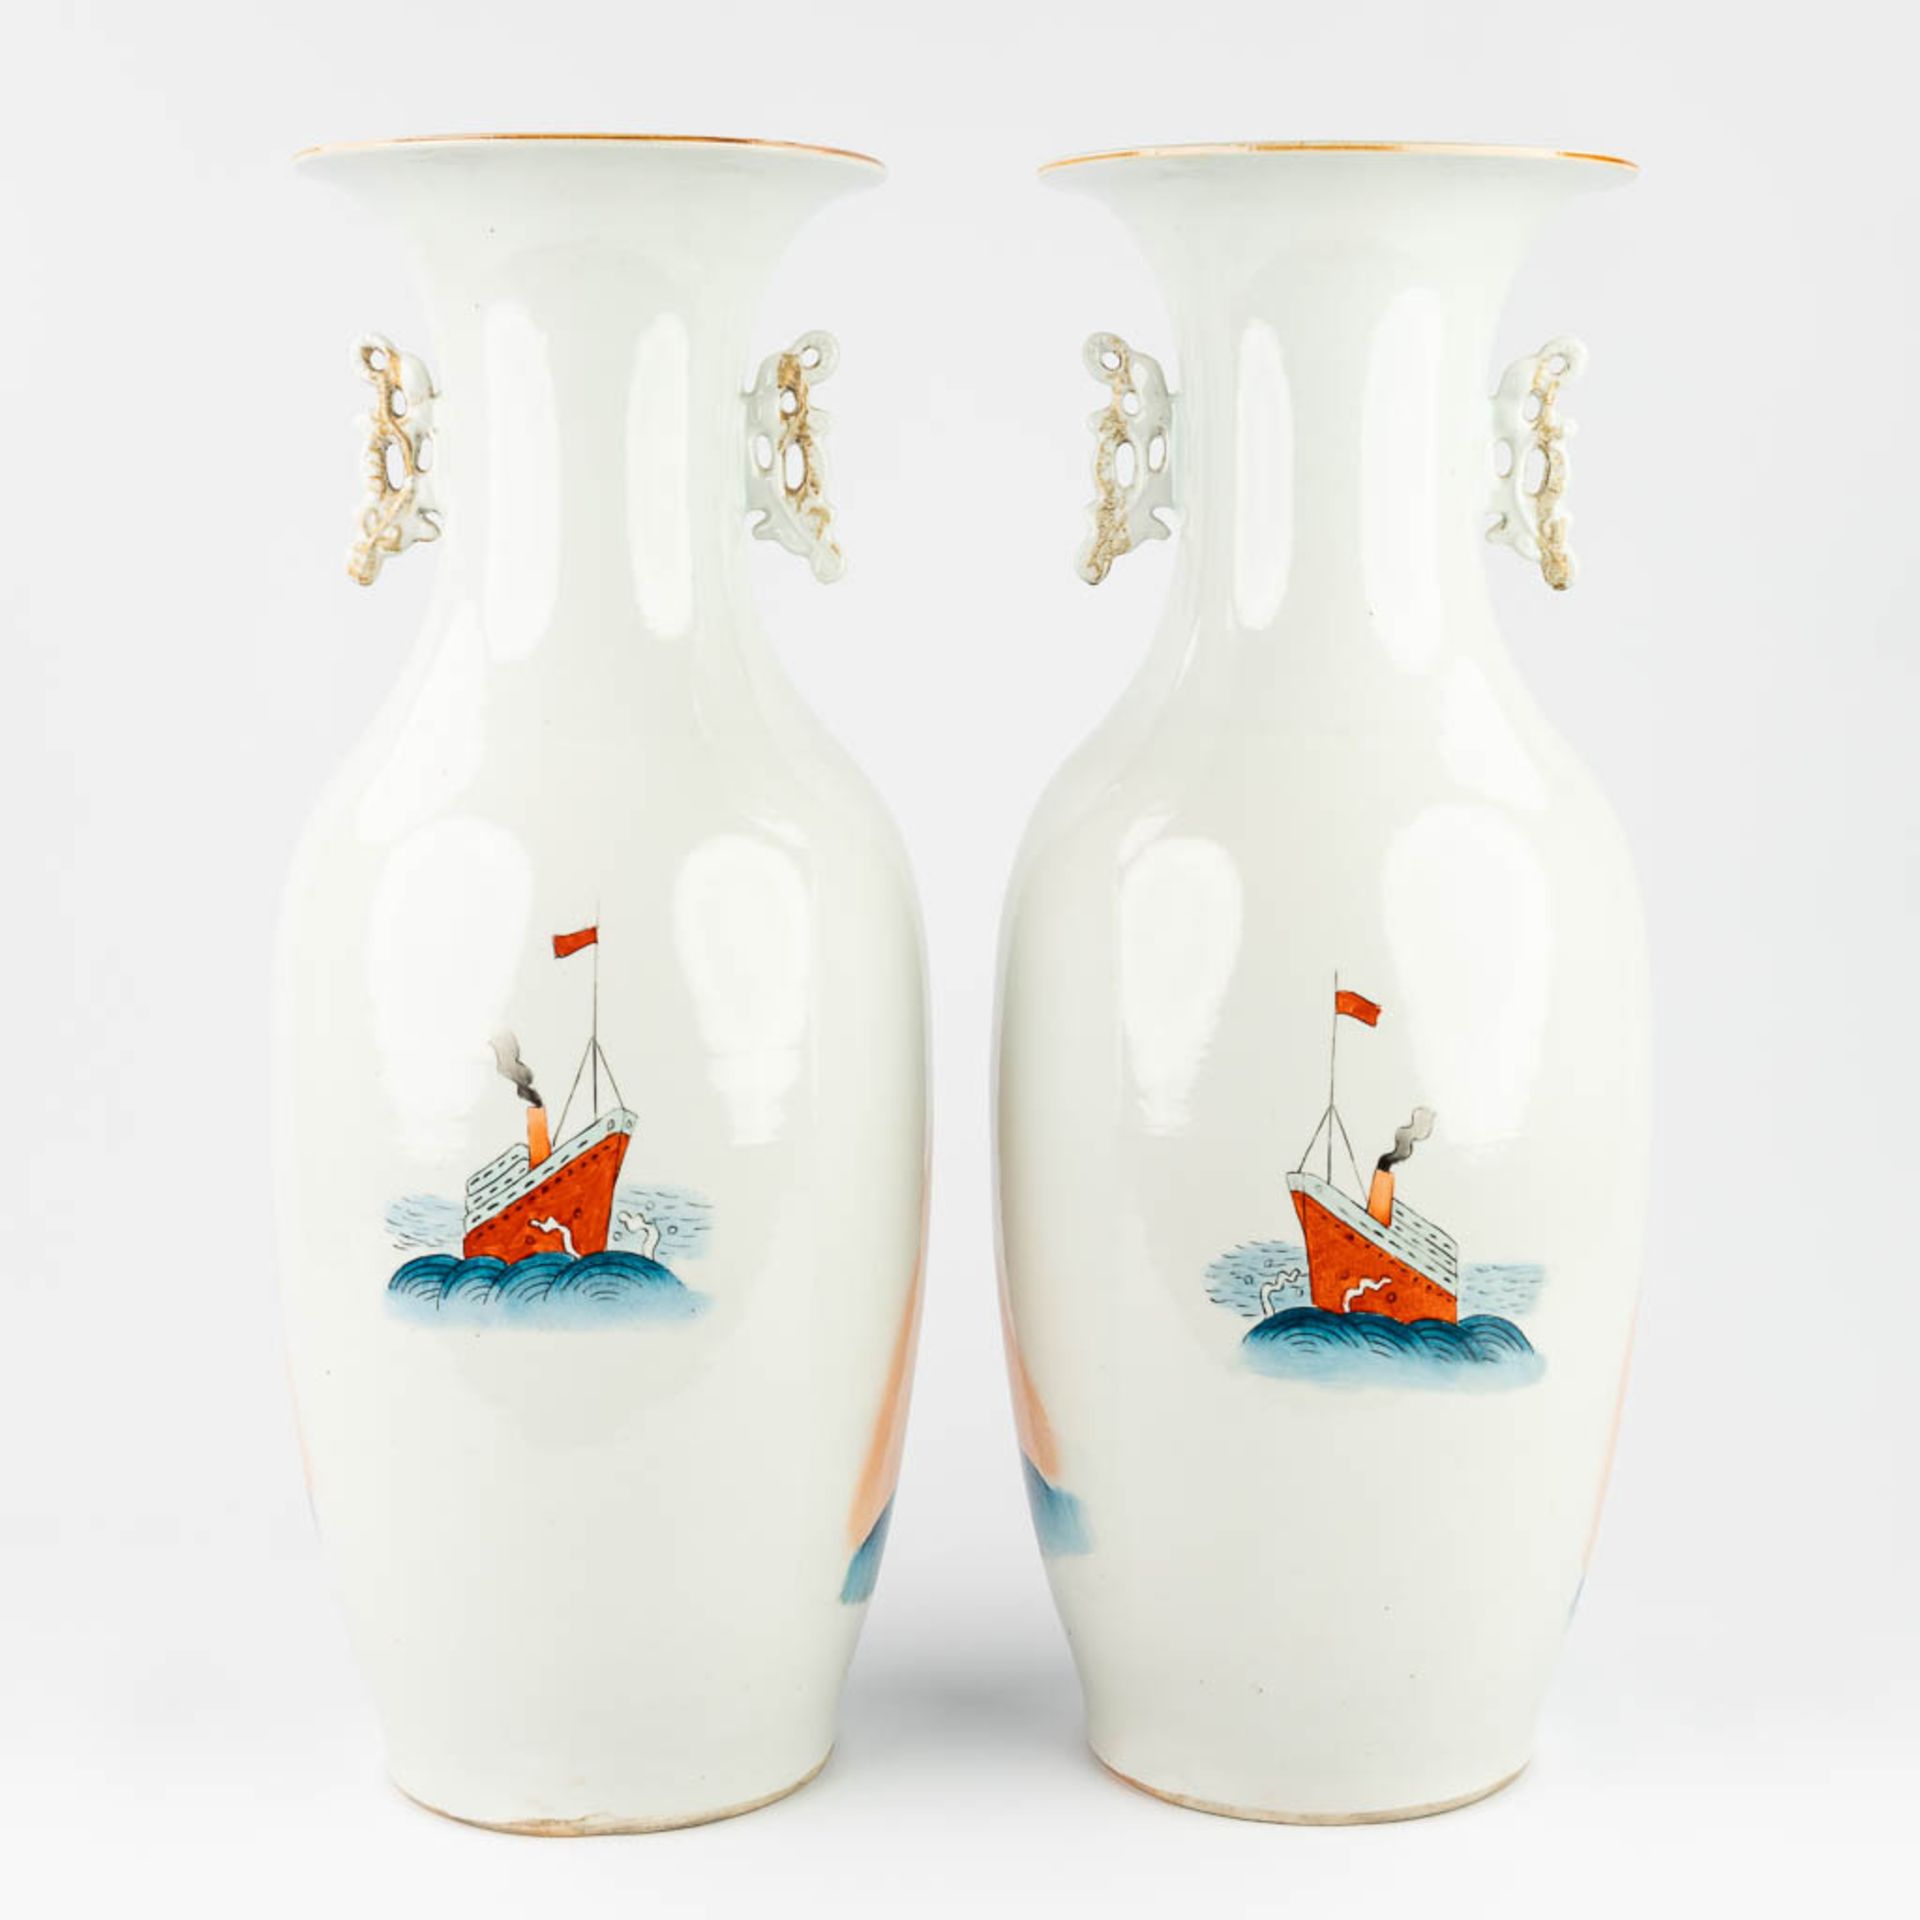 A pair of Chinese vases made of glazed porcelain, and decorated with ships (59,5 x 23 cm) - Image 6 of 14